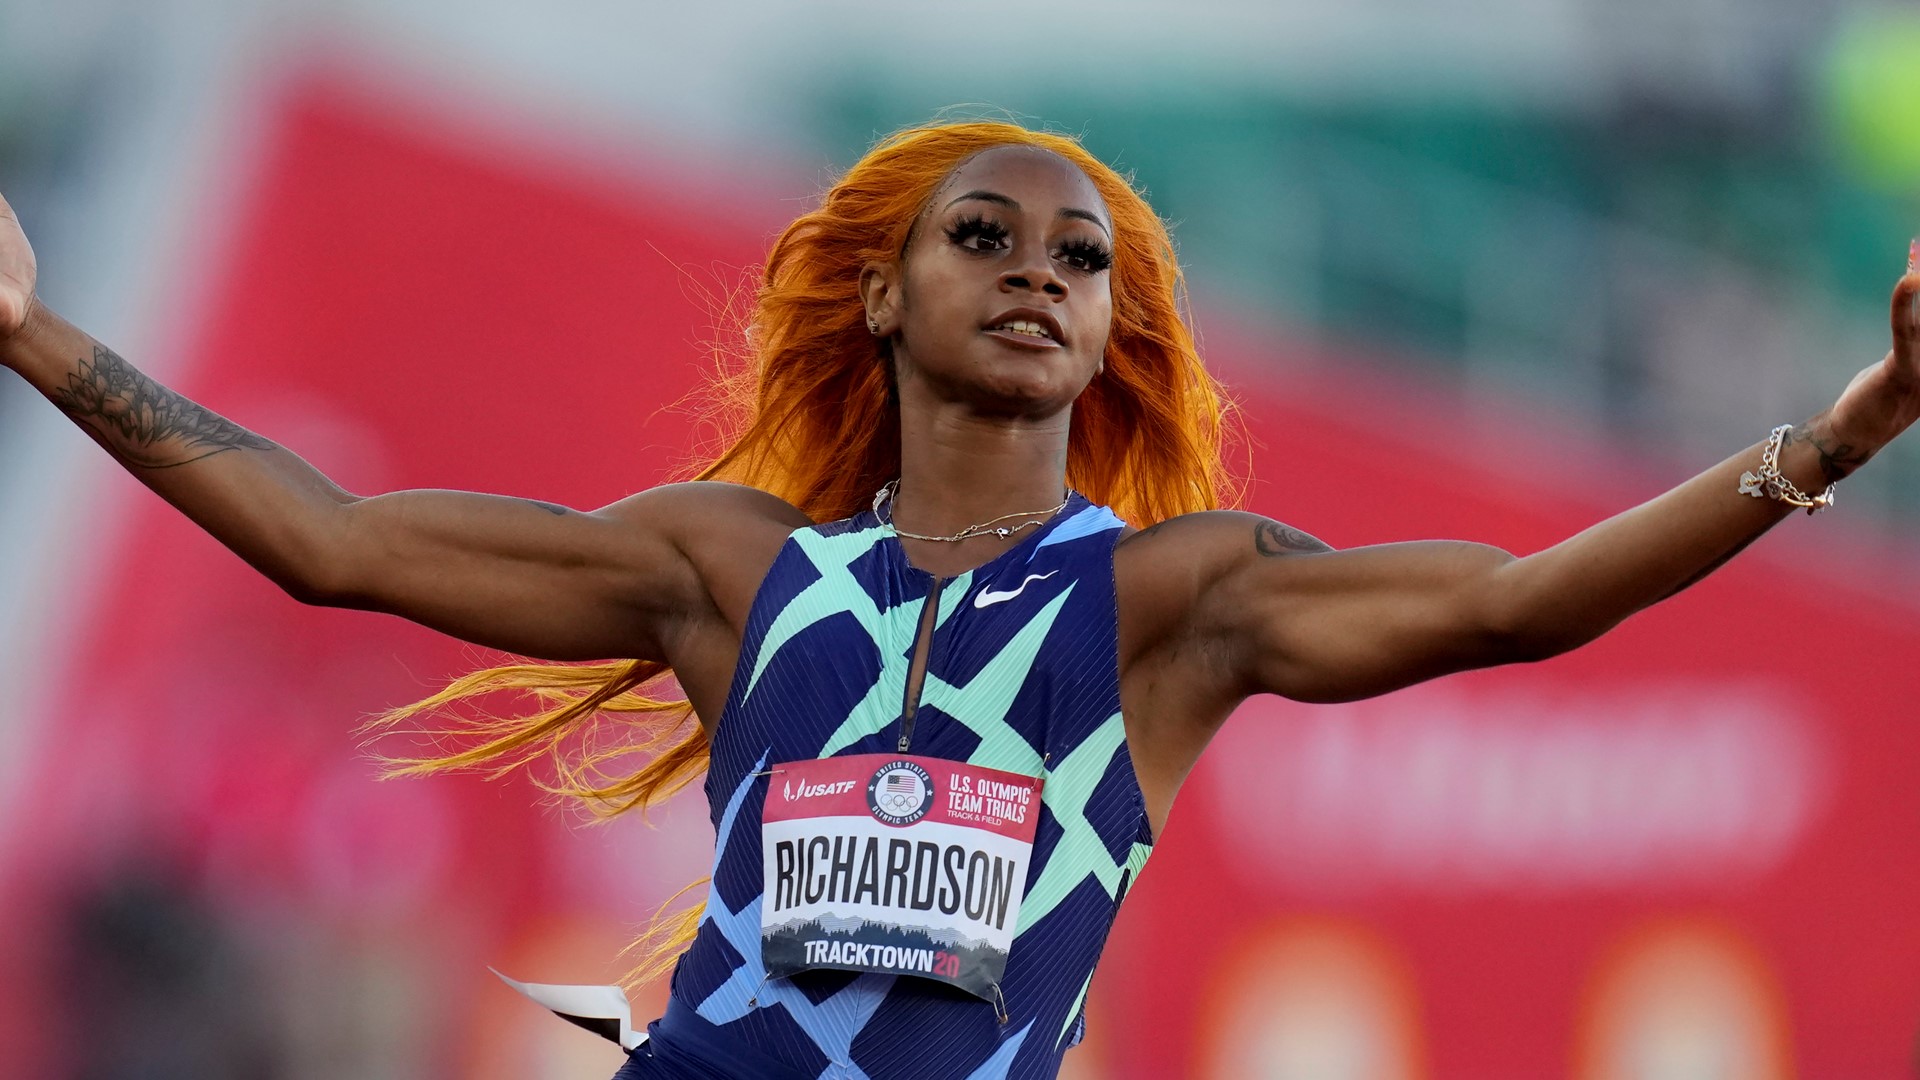 U.S. track star Sha'Carri Richardson won the women's 100-meters at the Olympic trials, but those results have been wiped out due to a positive drug test.